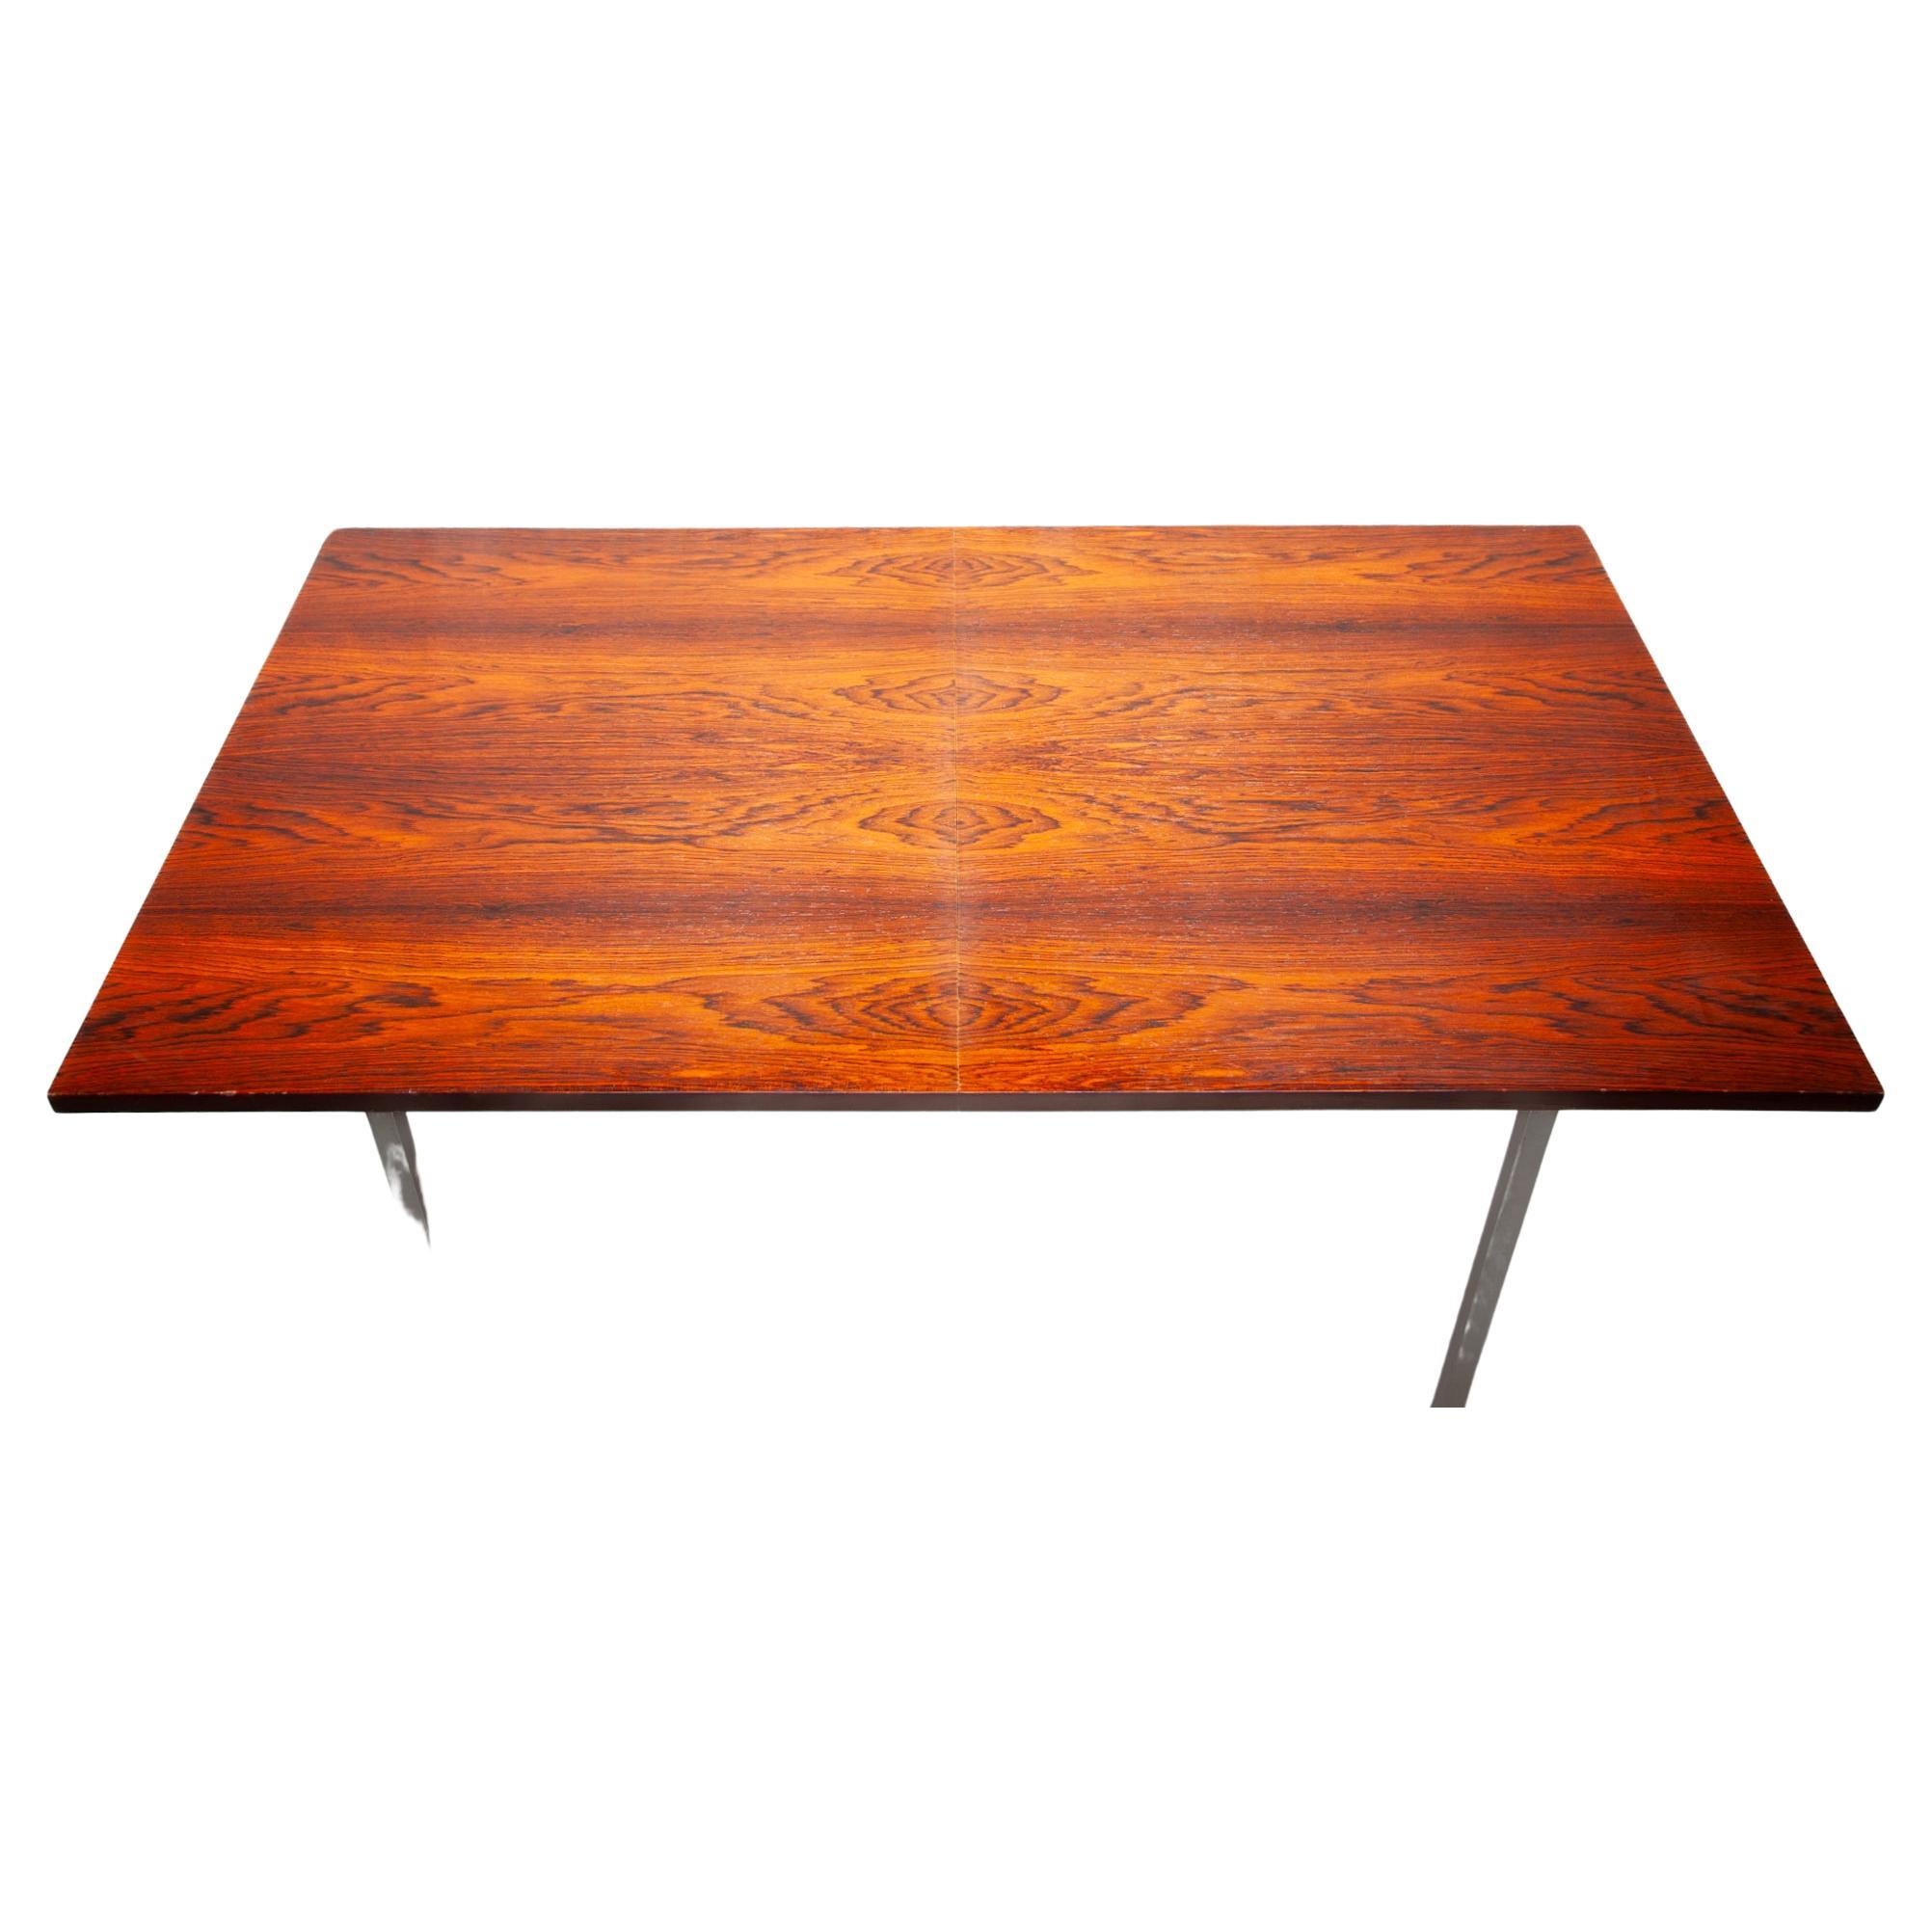 Alfred Hendrickx Dining Room Tables